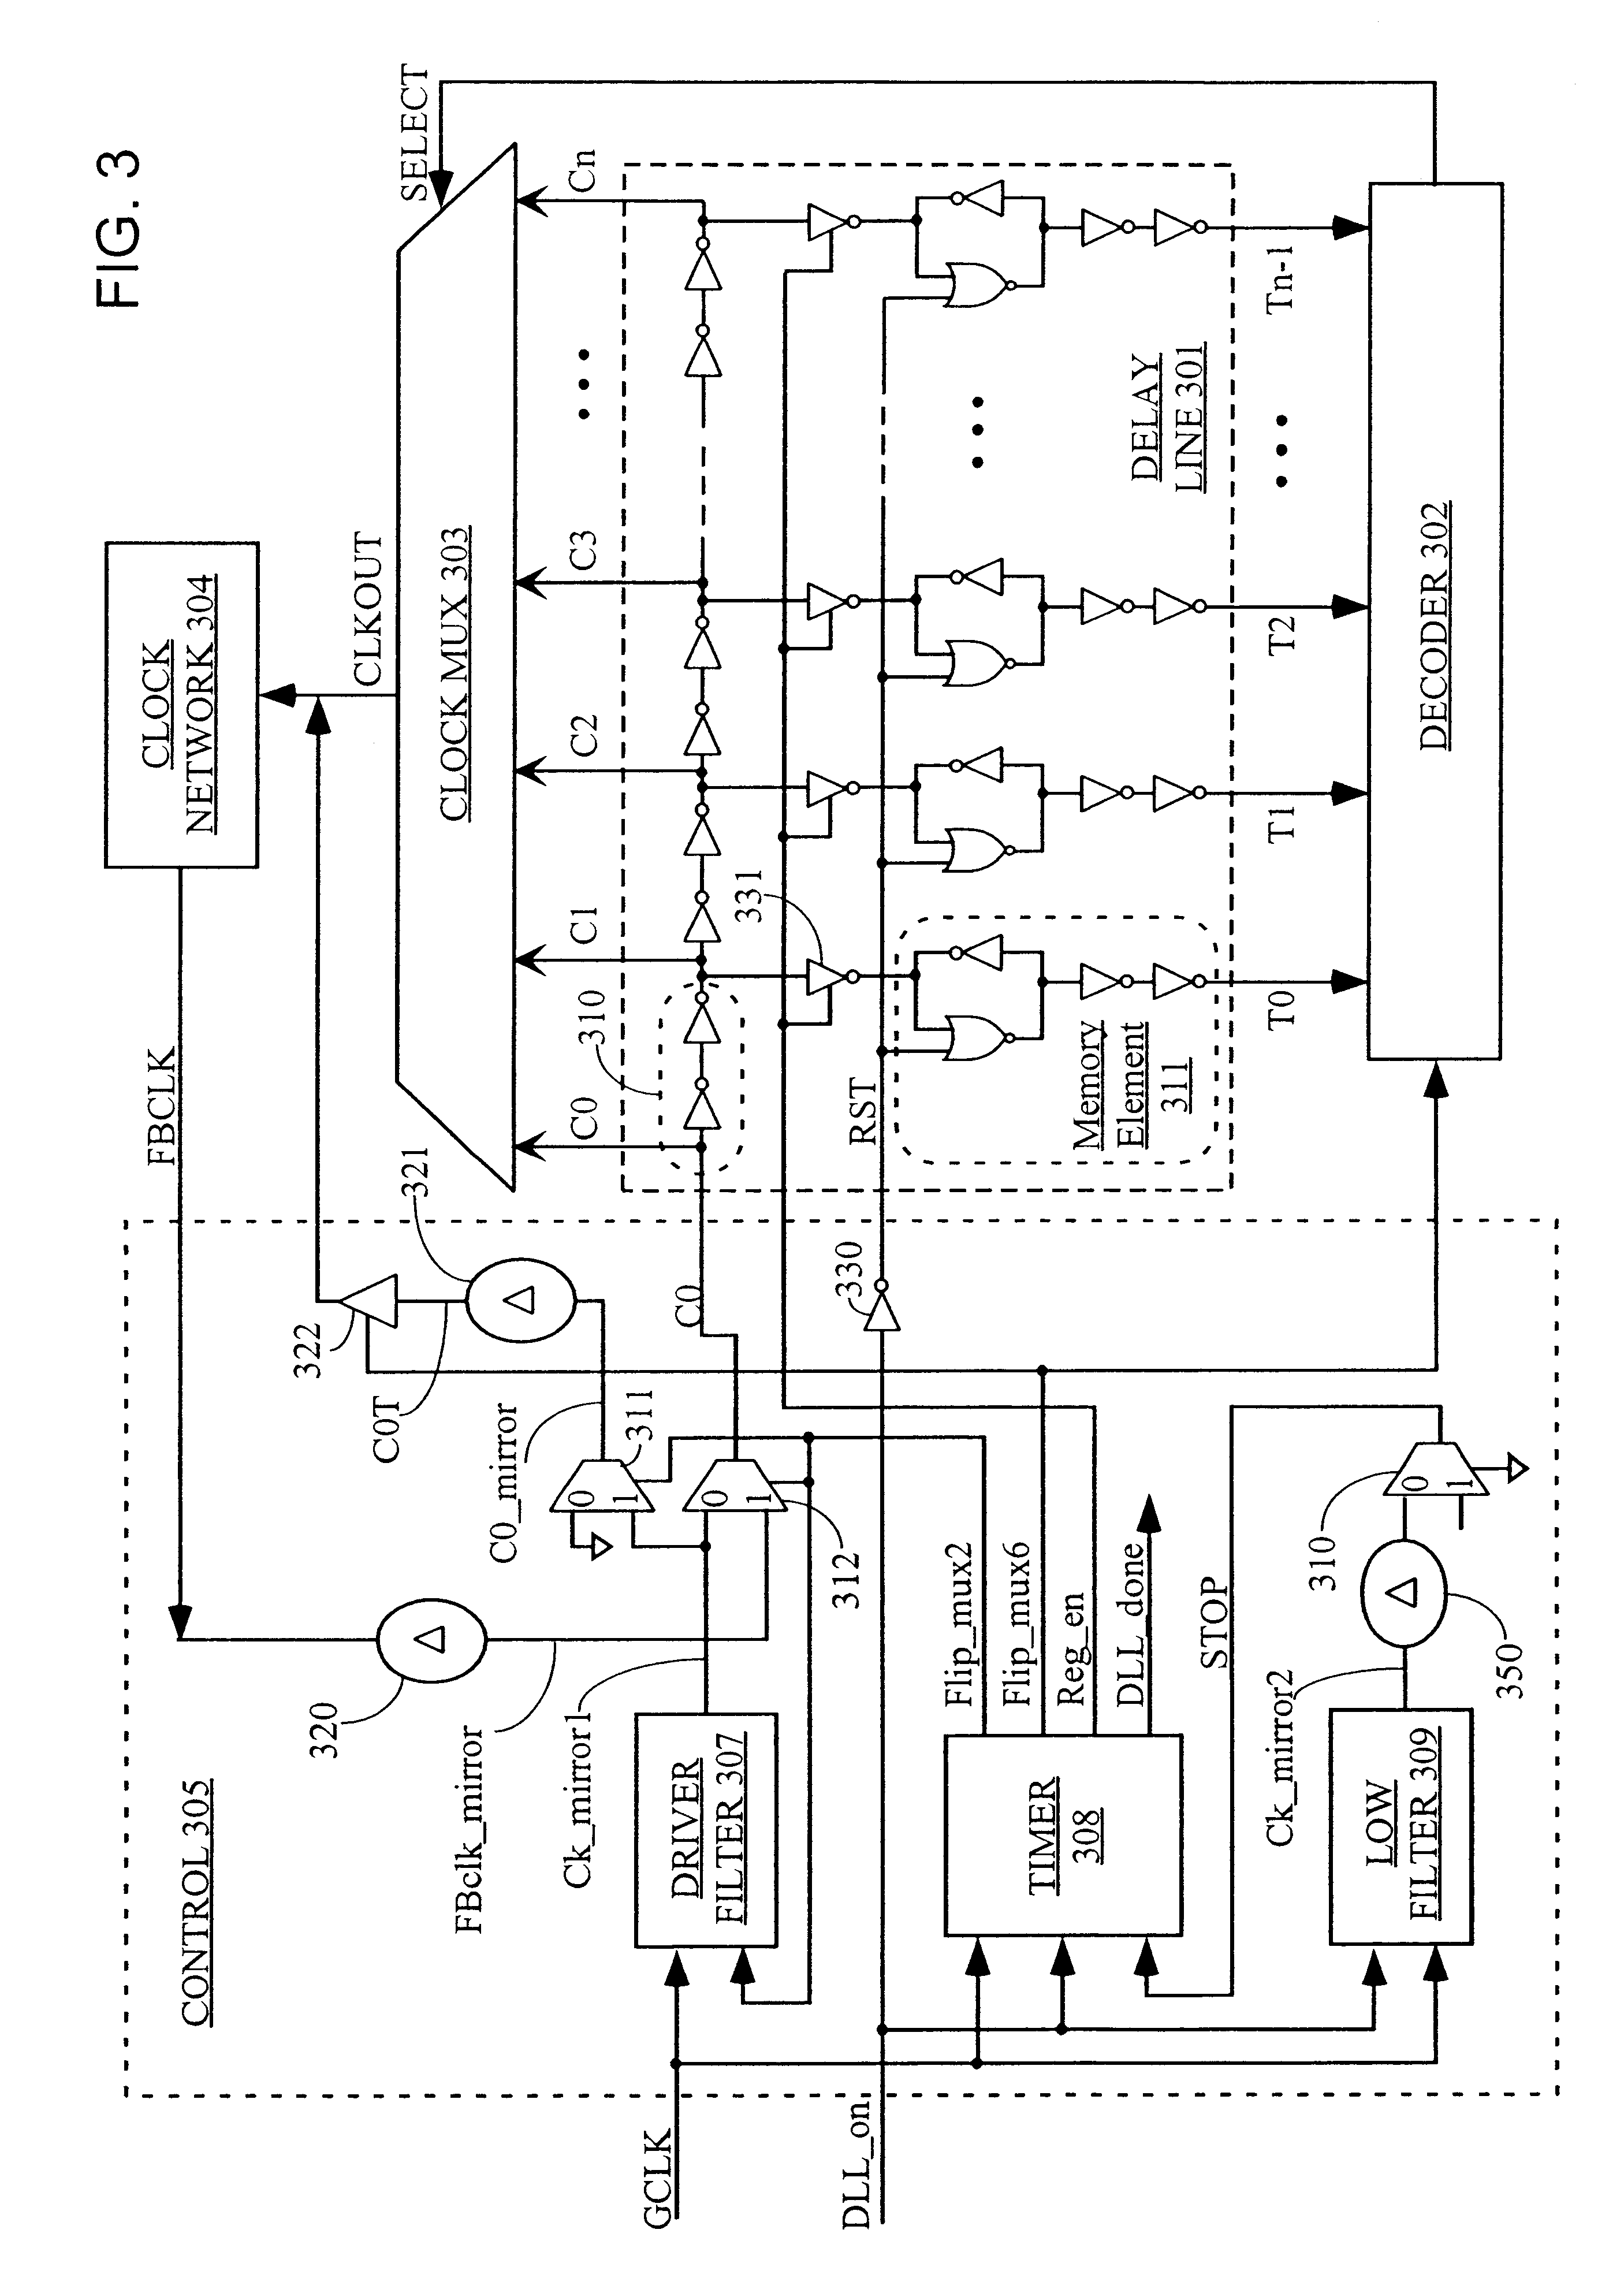 Direct-measured DLL circuit and method